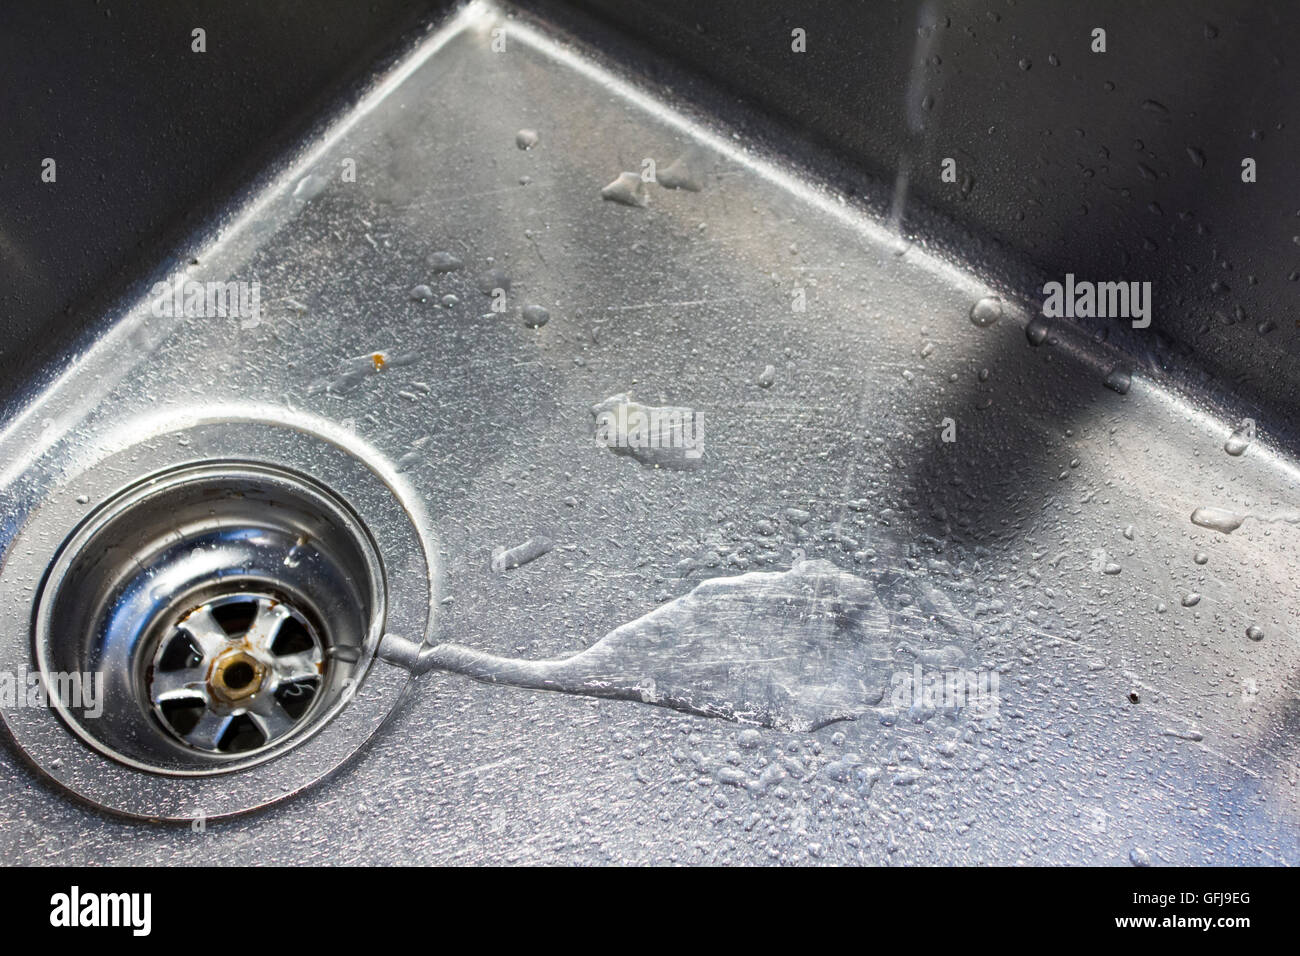 Water from a tap runs down the drain in a stainless steel sink Stock Photo